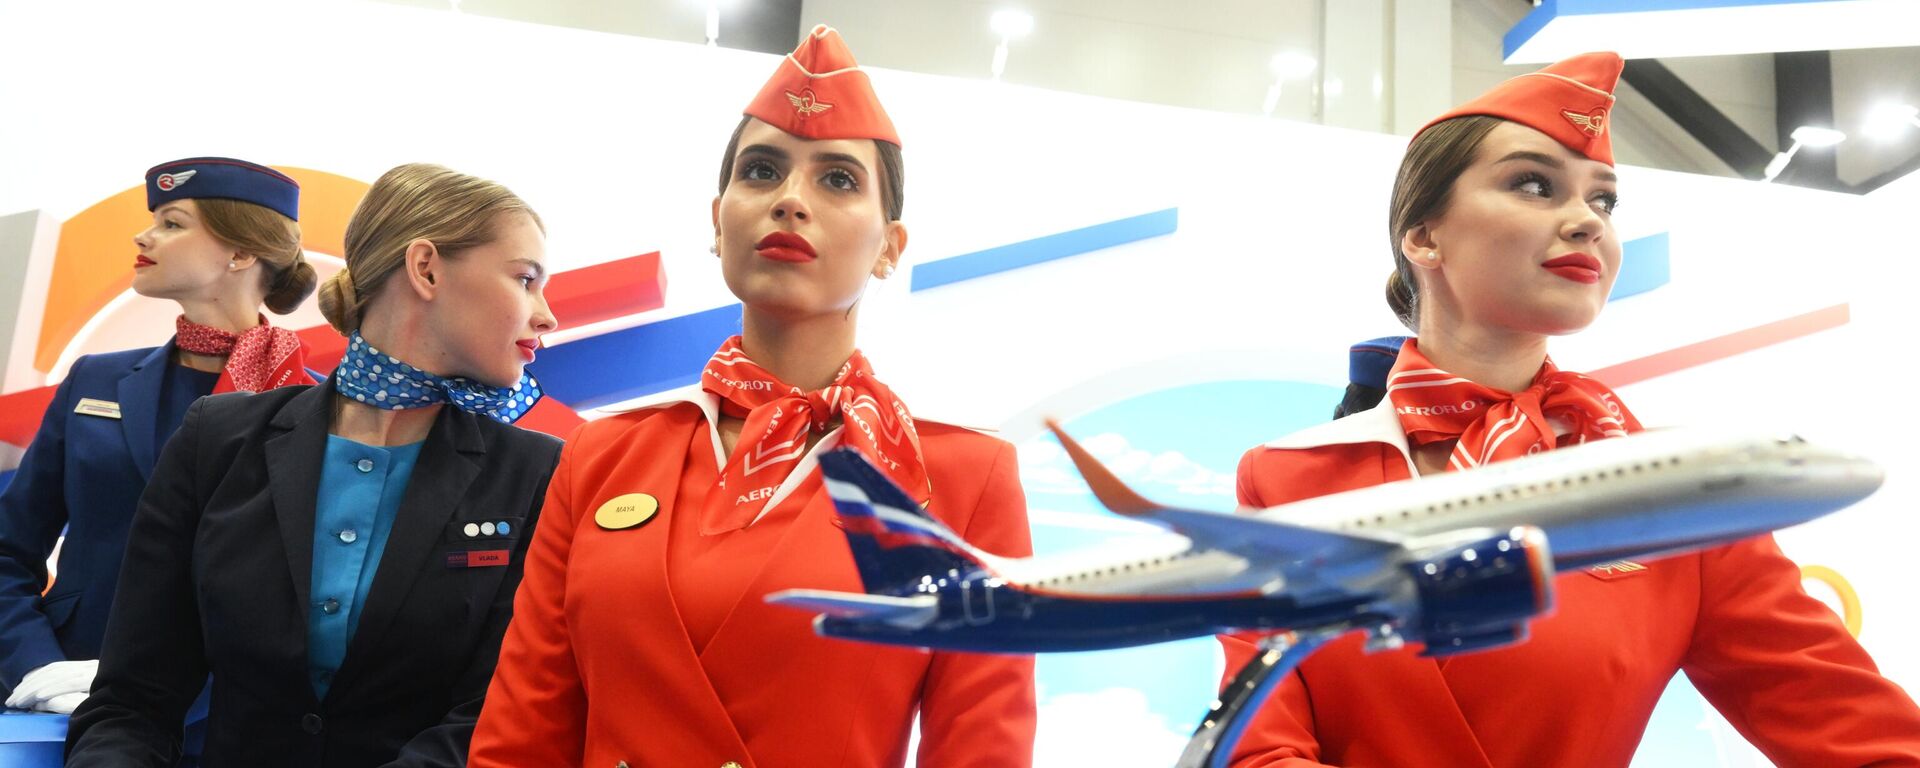 Aeroflot's stand at the Expoforum Convention and Exhibition Center at SPIEF 2023 - Sputnik Africa, 1920, 14.06.2023